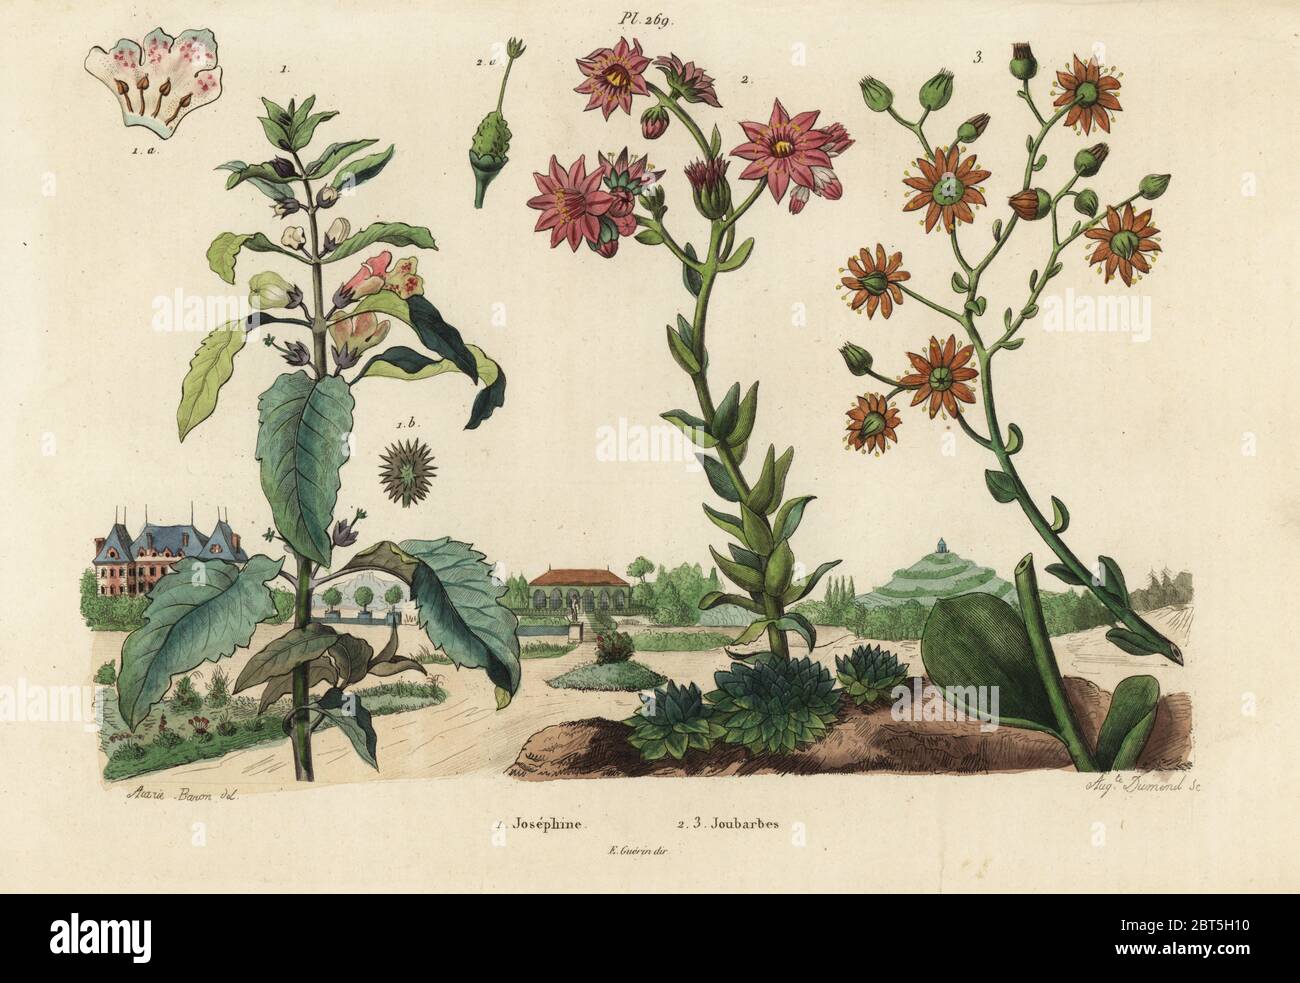 Josephine plant, Josephinia imperatricis 1 and stonecrops, Crassula species 2,3. Josephine, Joubarbes. Handcoloured steel engraving by Auguste Dumenil after an illustration by A. Carie Baron from Felix-Edouard Guerin-Meneville's Dictionnaire Pittoresque d'Histoire Naturelle (Picturesque Dictionary of Natural History), Paris, 1834-39. Stock Photo